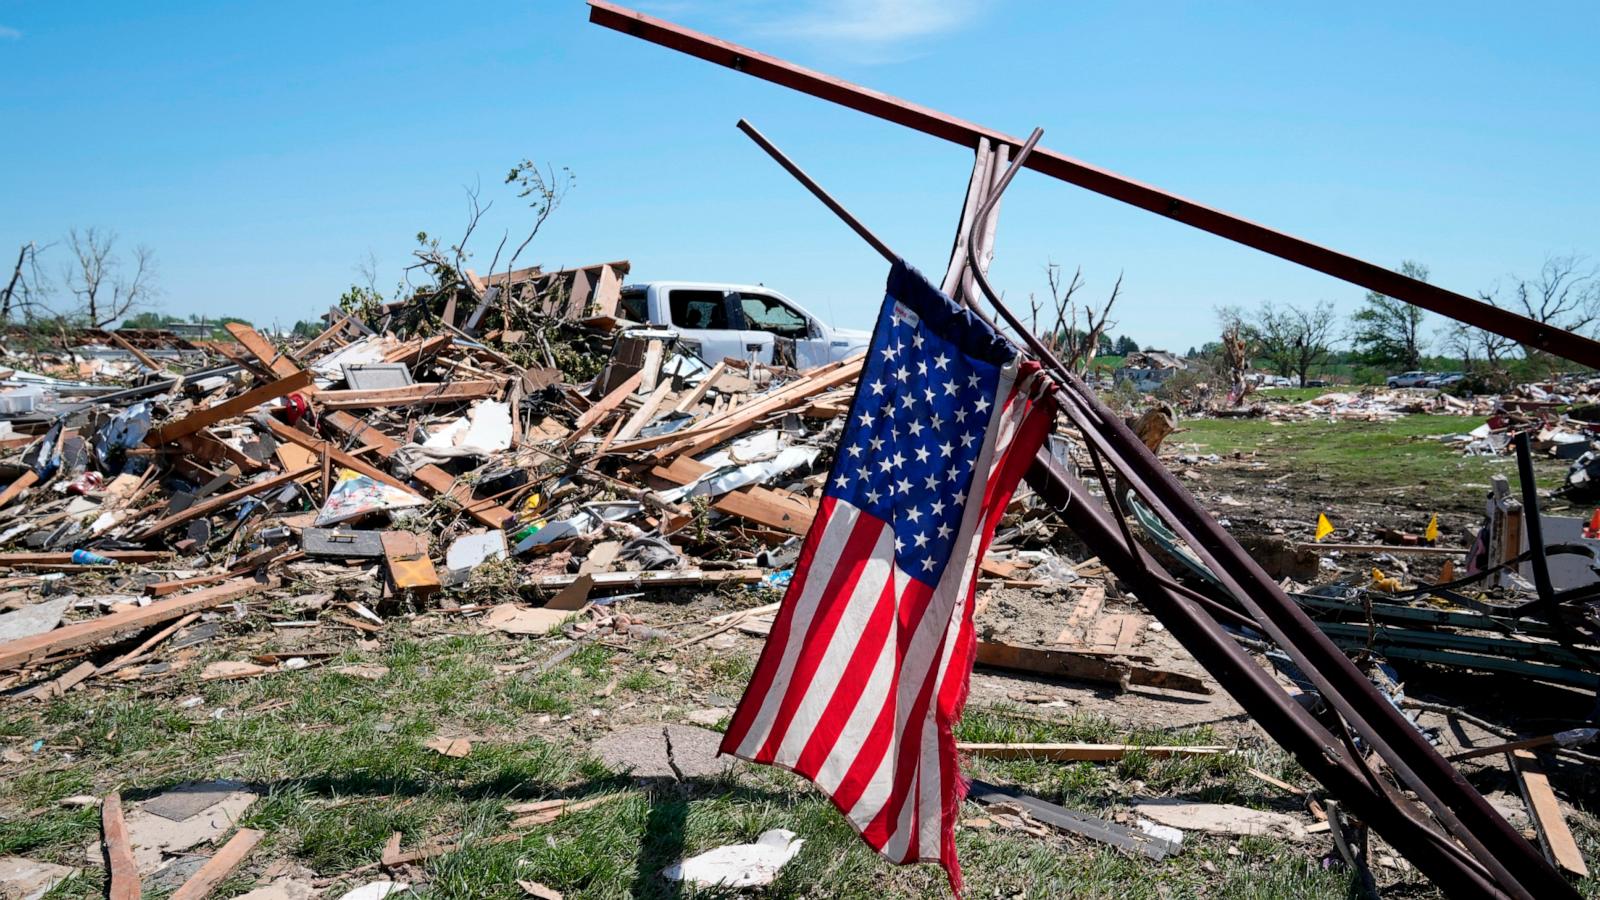 106 counties under disaster declaration in Texas following severe storms, tornadoes: Governor